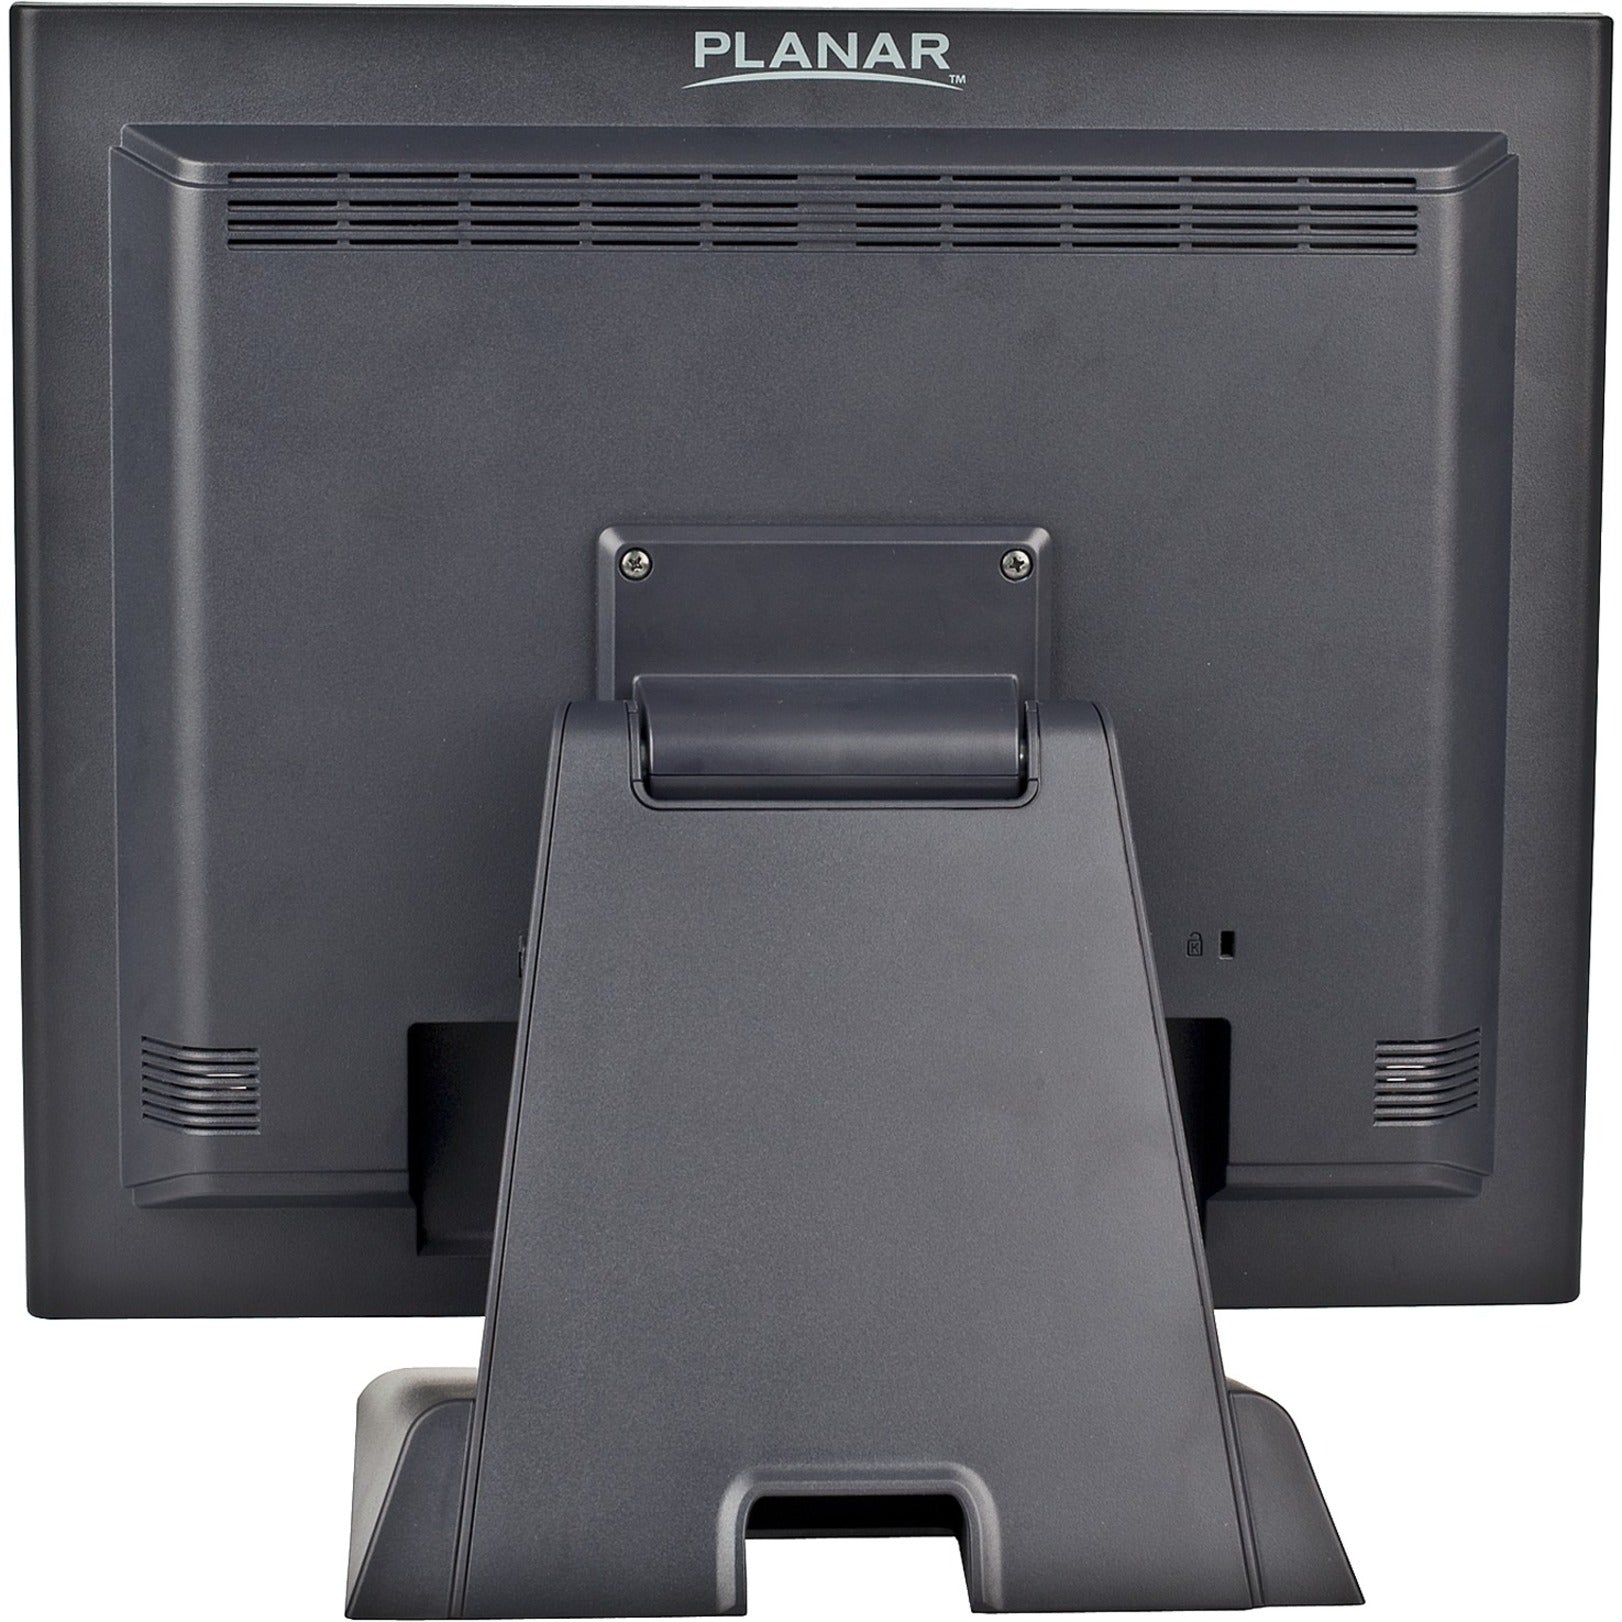 Planar 997-5967-02 PT1545R 15" Touch Screen Point Of Sale Monitor, VGA HDMI DP Speakers 90 Degree Tilt